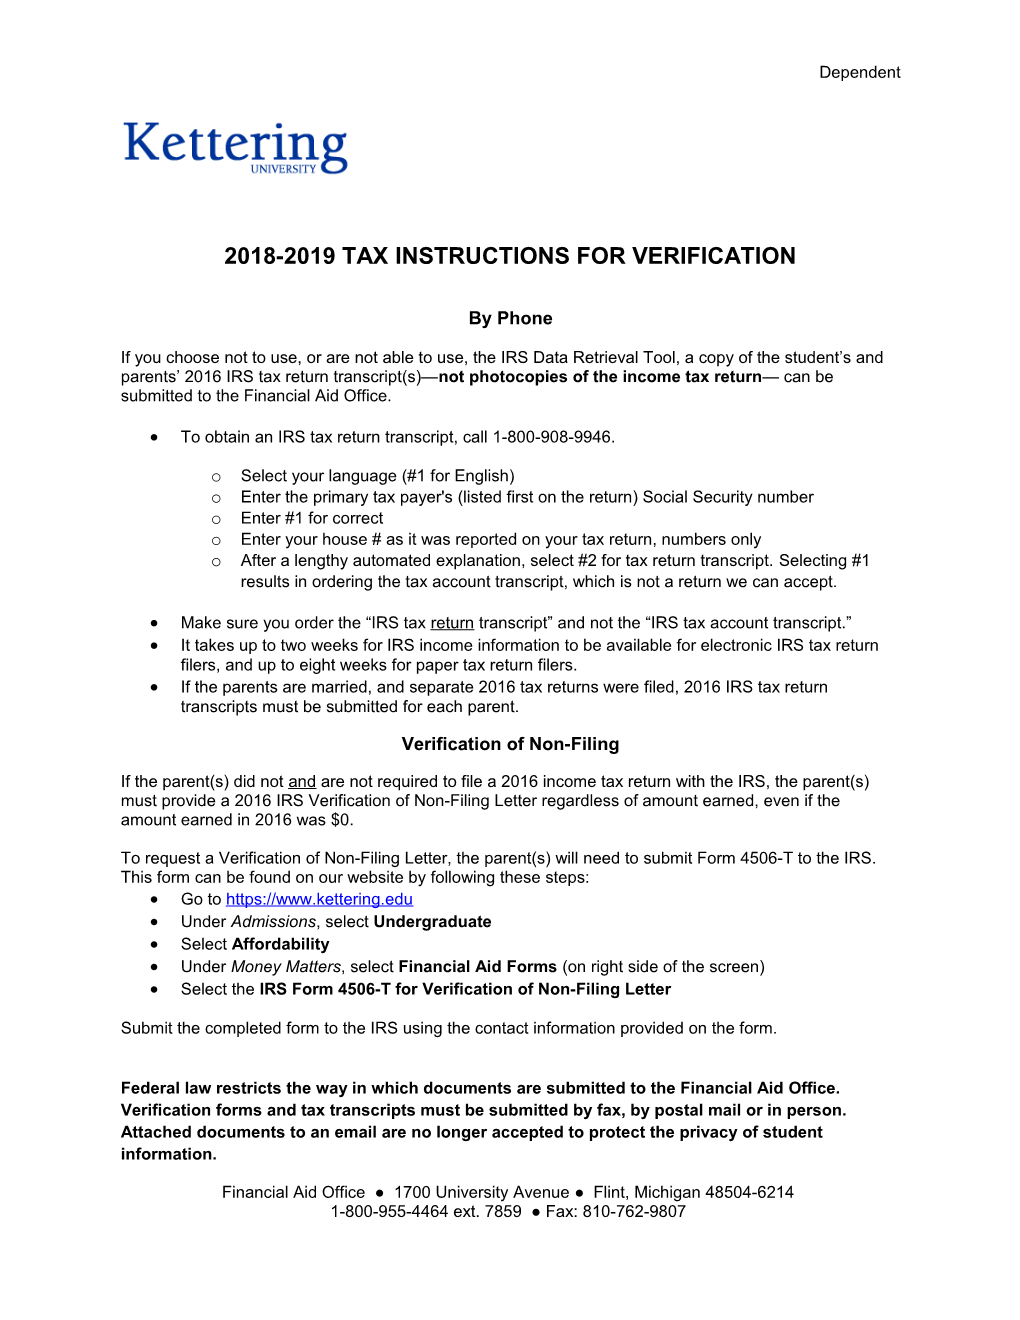 2018-2019 Tax Instructions for Verification